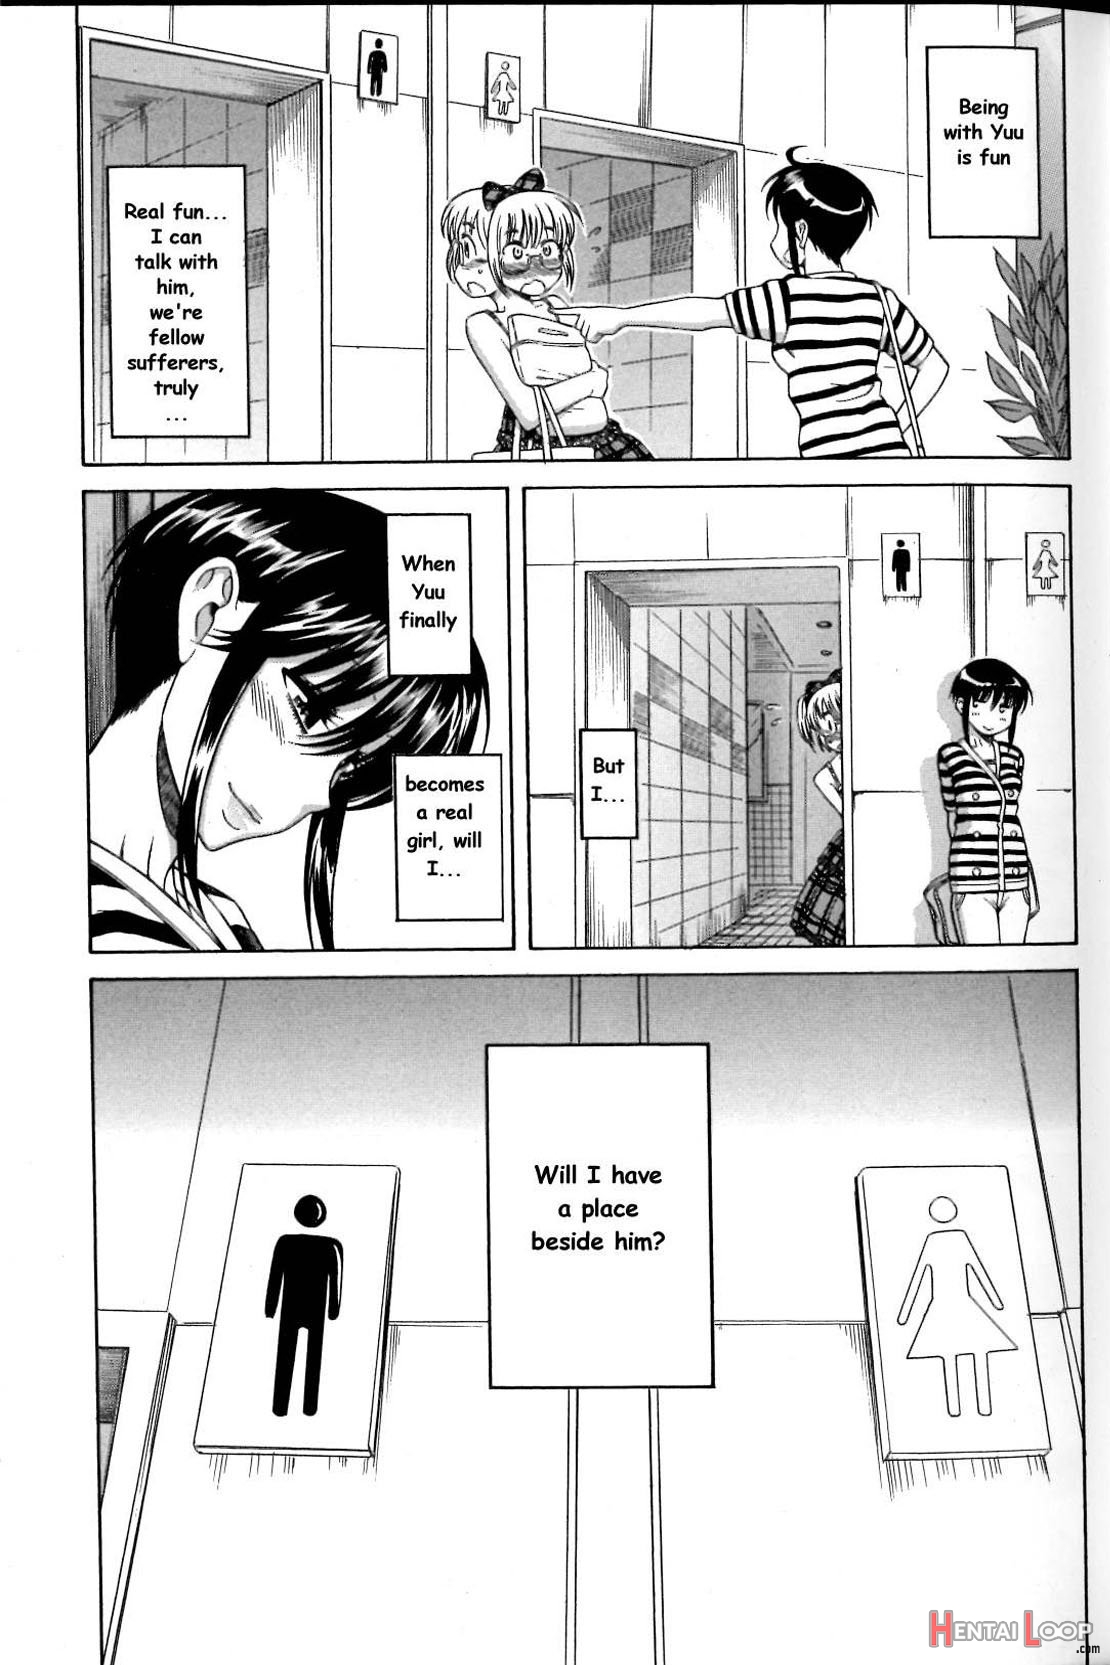 Boy Meets Girl, Girl Meets Boy 2- Single Page Version page 15